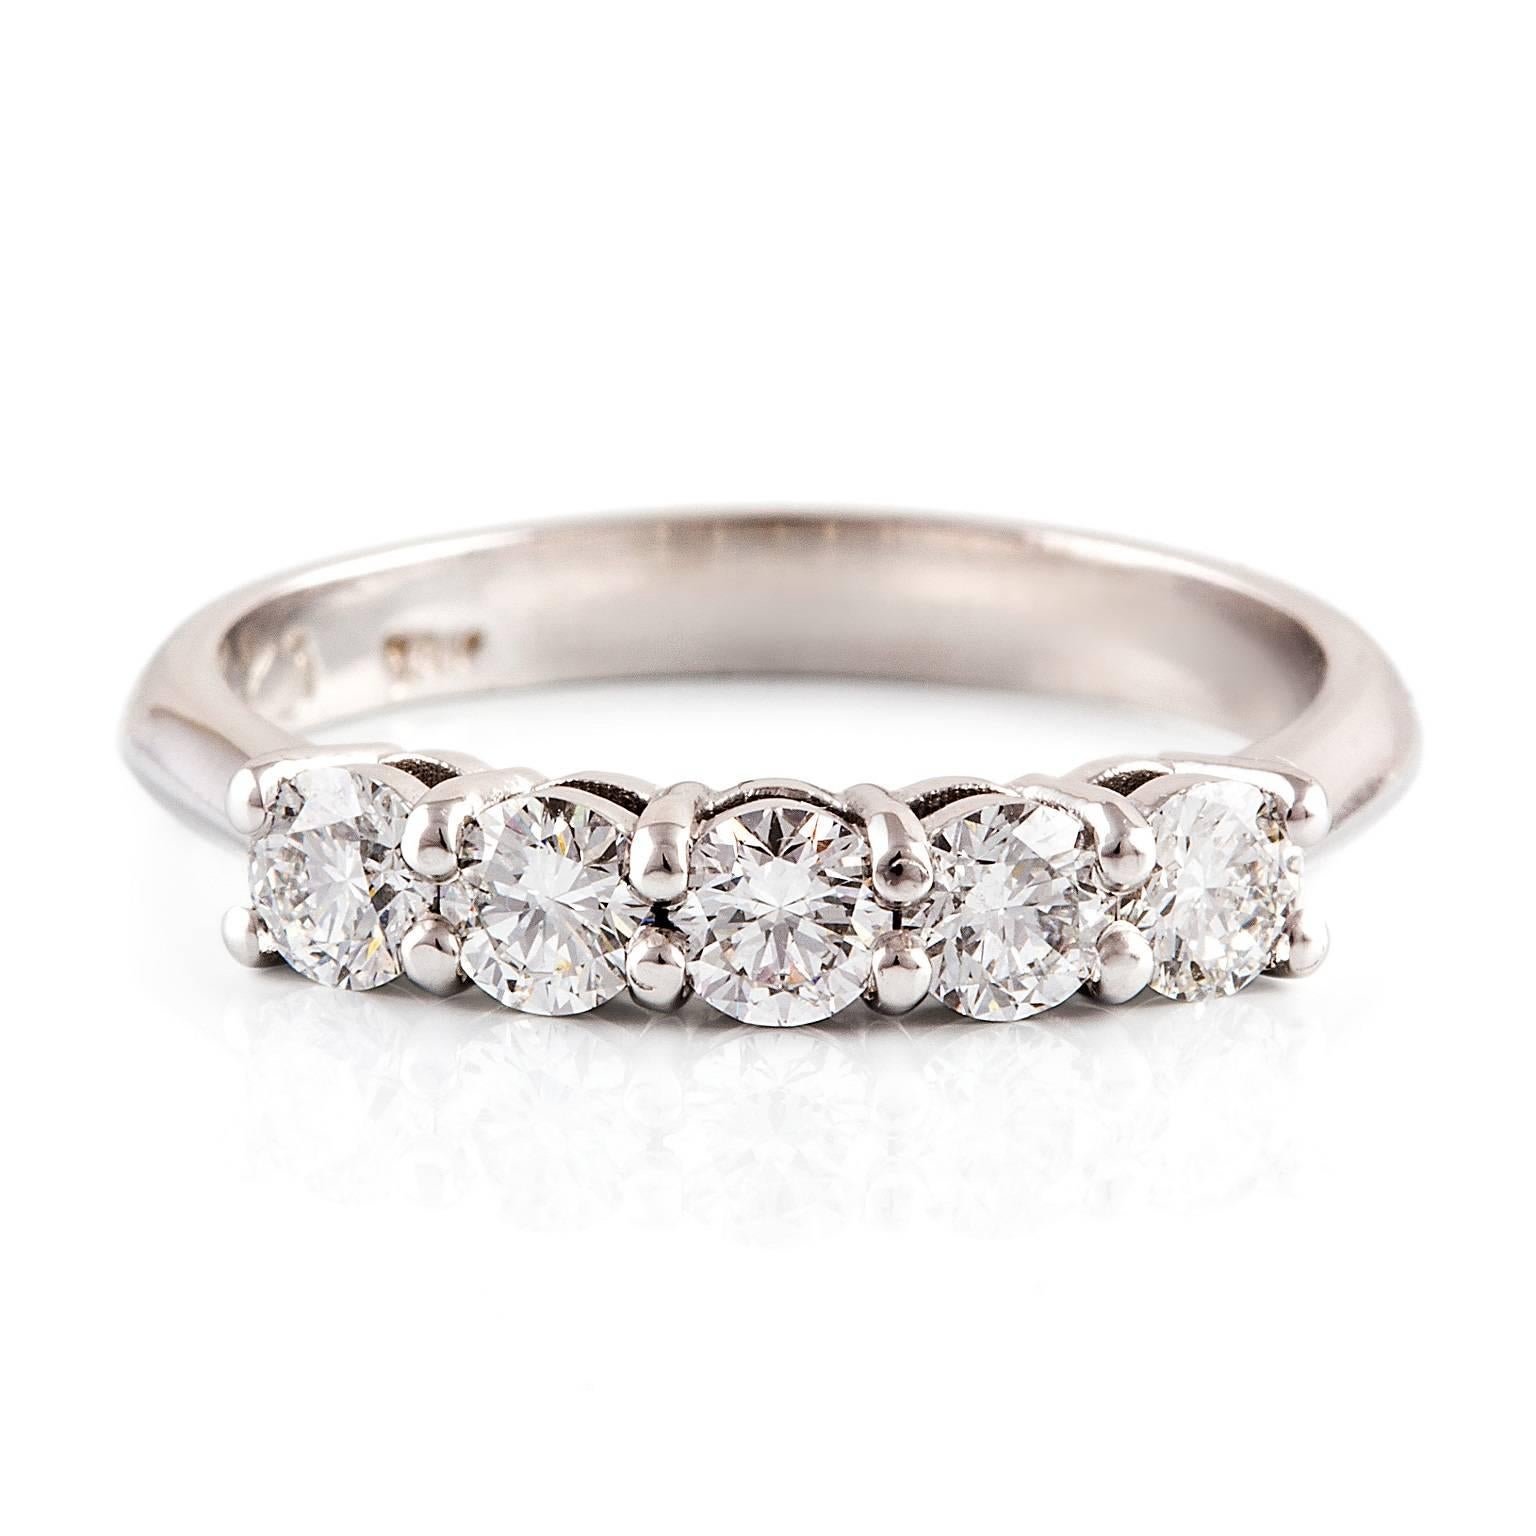 Bianca Eternity Ring

Simple, timeless, stunning. This 18ct white gold eternity ring is set with five lovely diamonds. This design also makes the perfect dress or other special commitment ring.

Round brilliant cut diamonds: F colour, VS clarity,